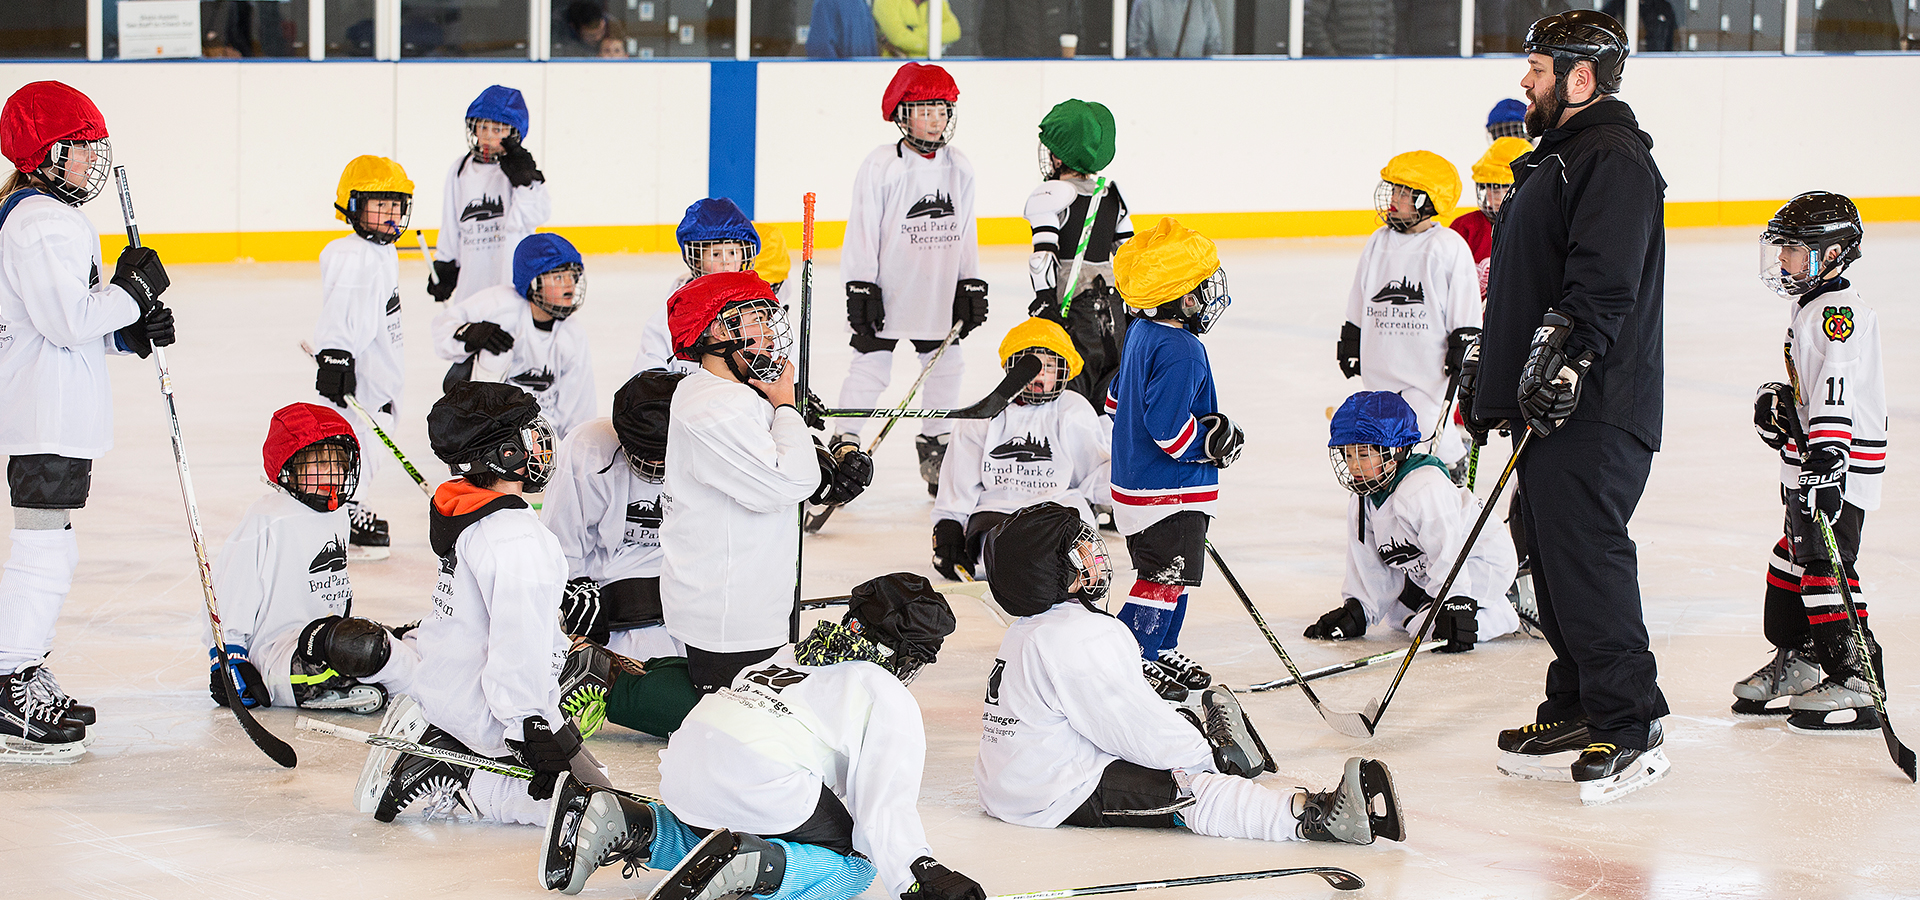 A coach talking to young hockey players at practice.